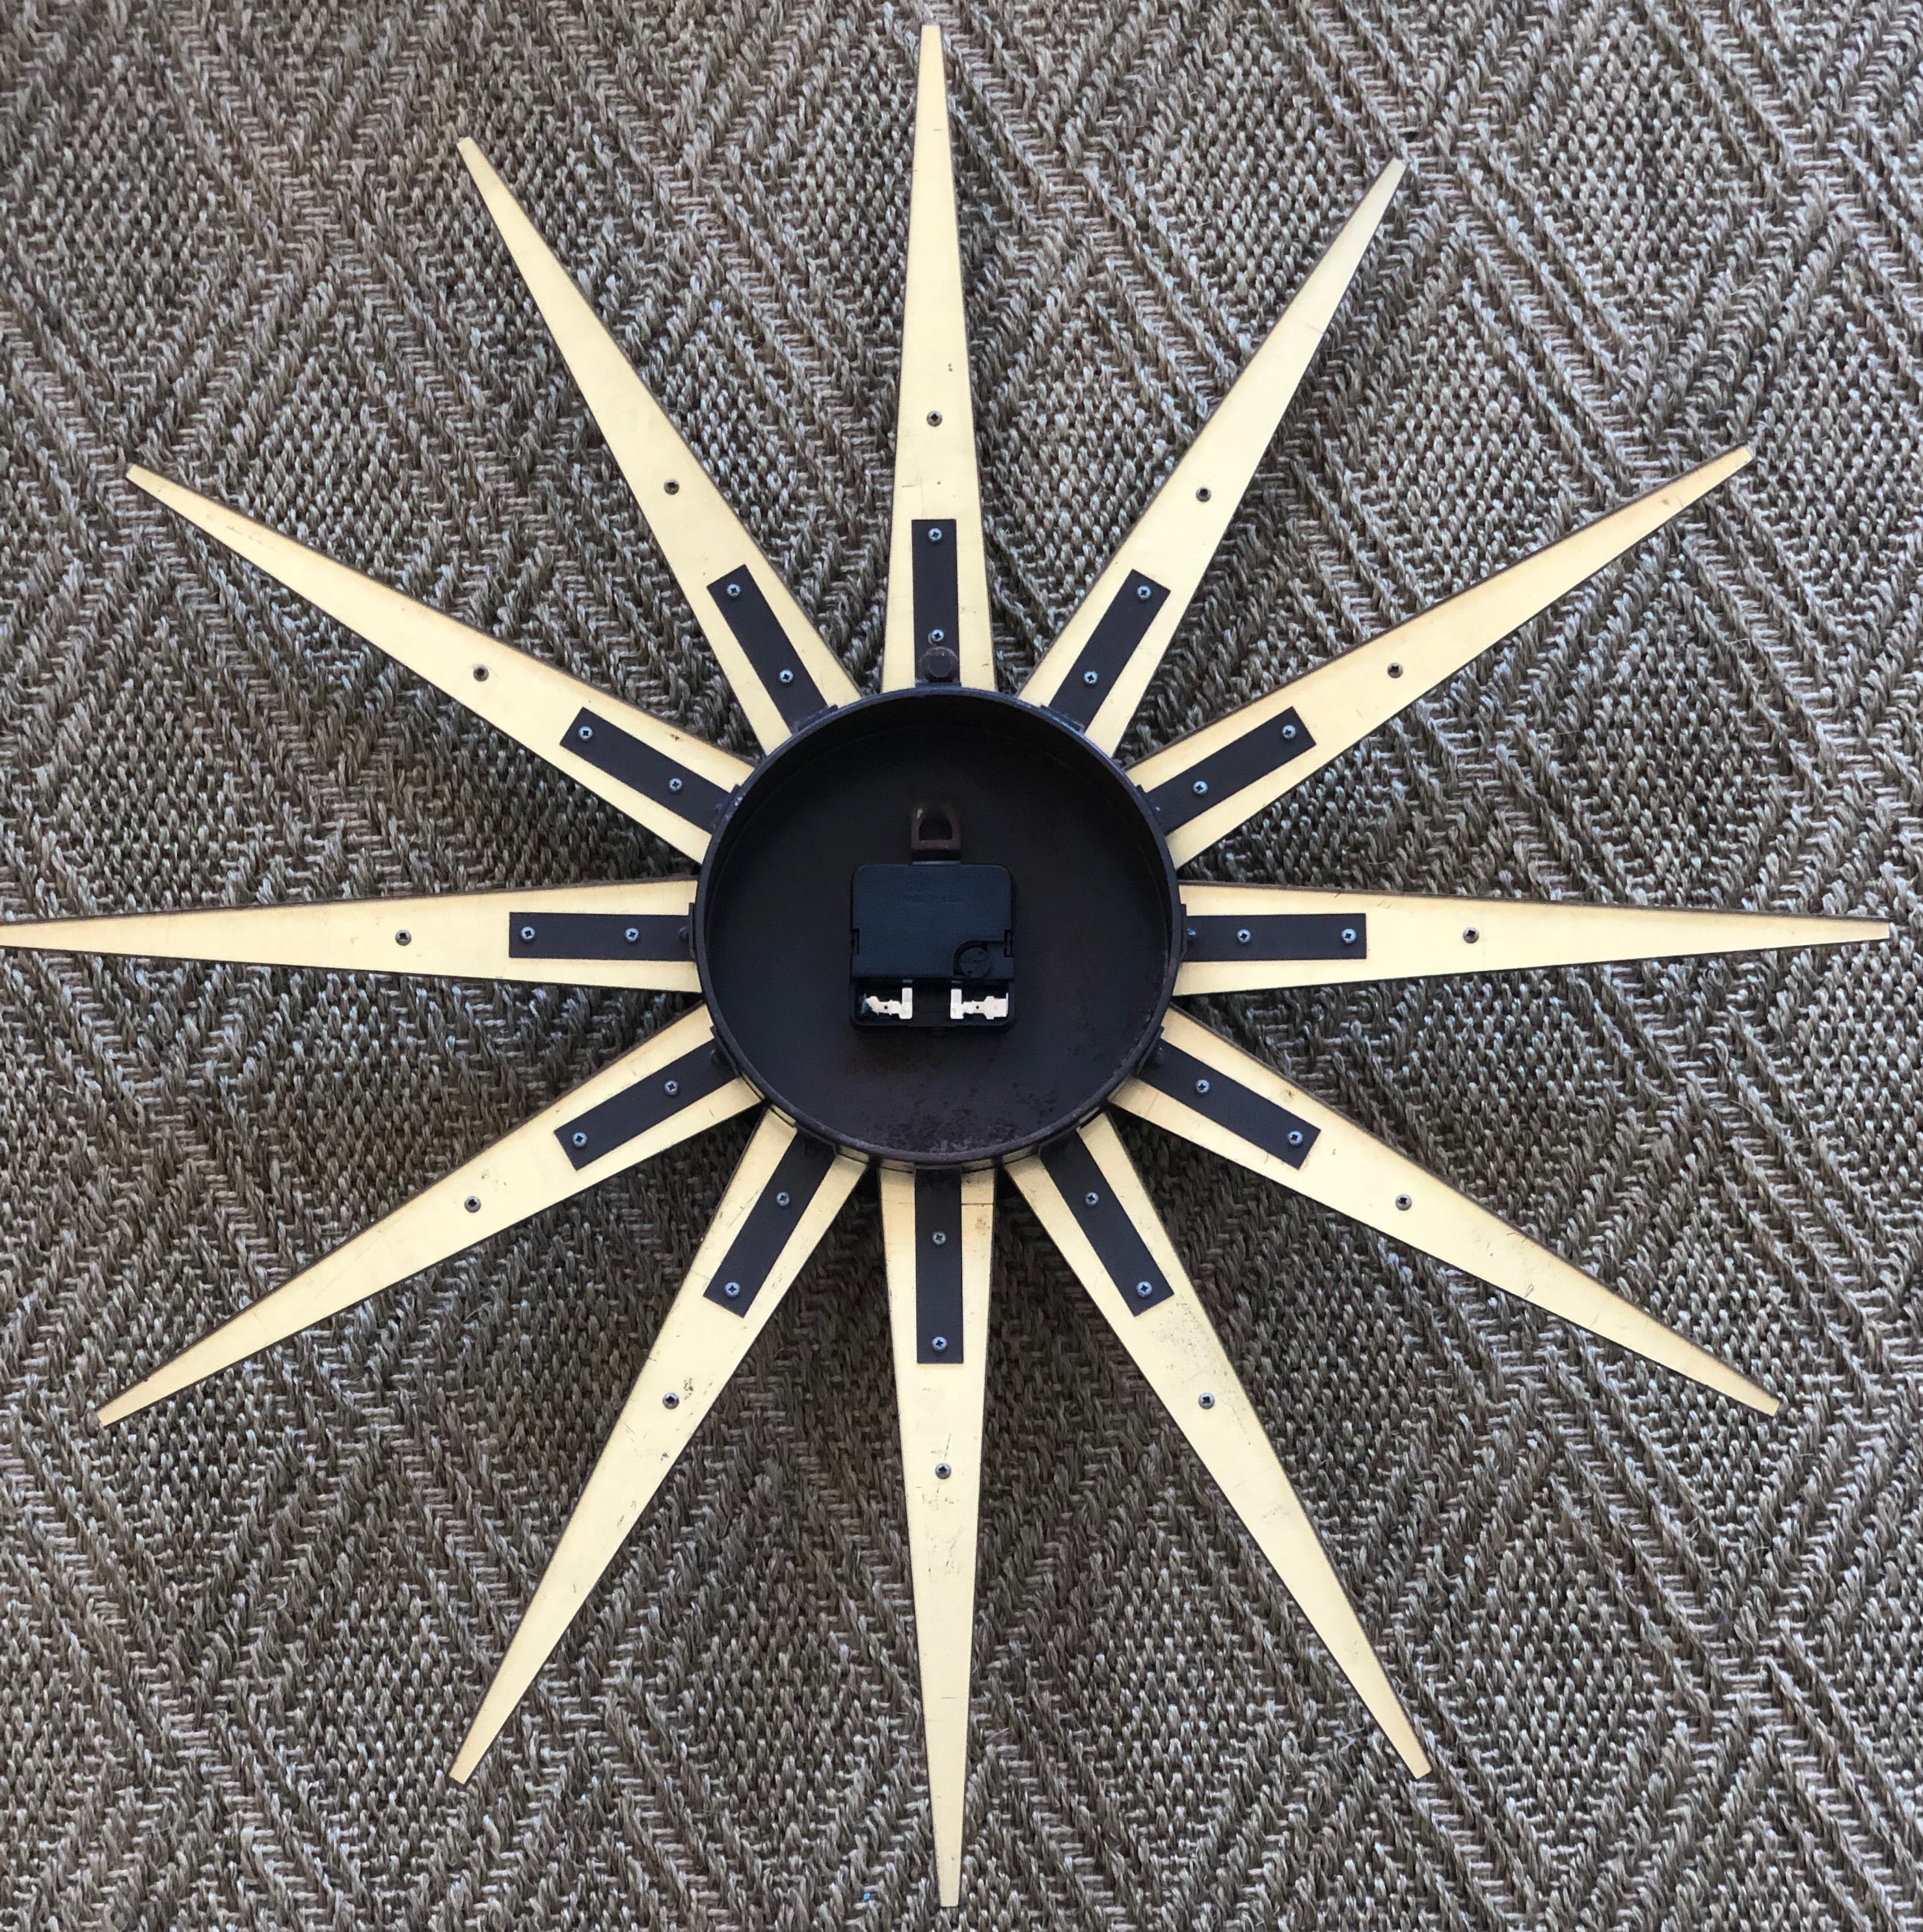 Mid-Century Starburst Wall Clock by Welby Division. Made in USA.